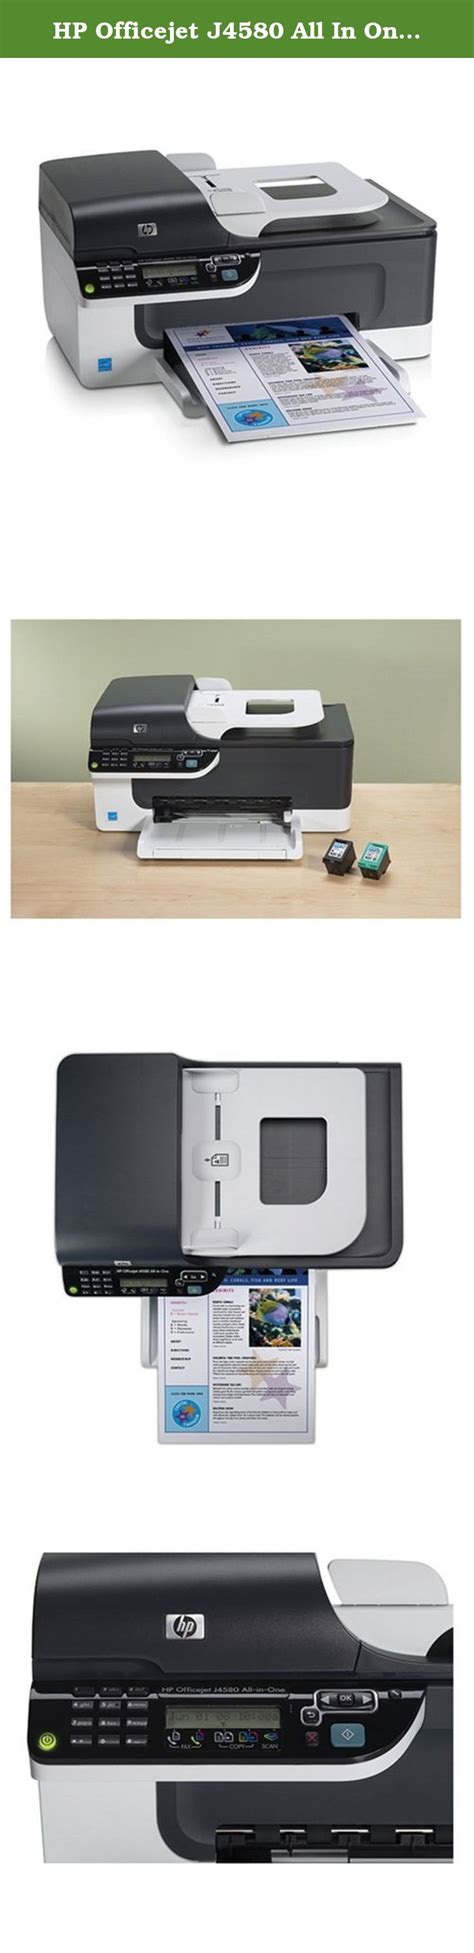 This bad boy has a 6ms response rate! HP Officejet J4580 All In One Printer. HP J4580 OfficeJet ...